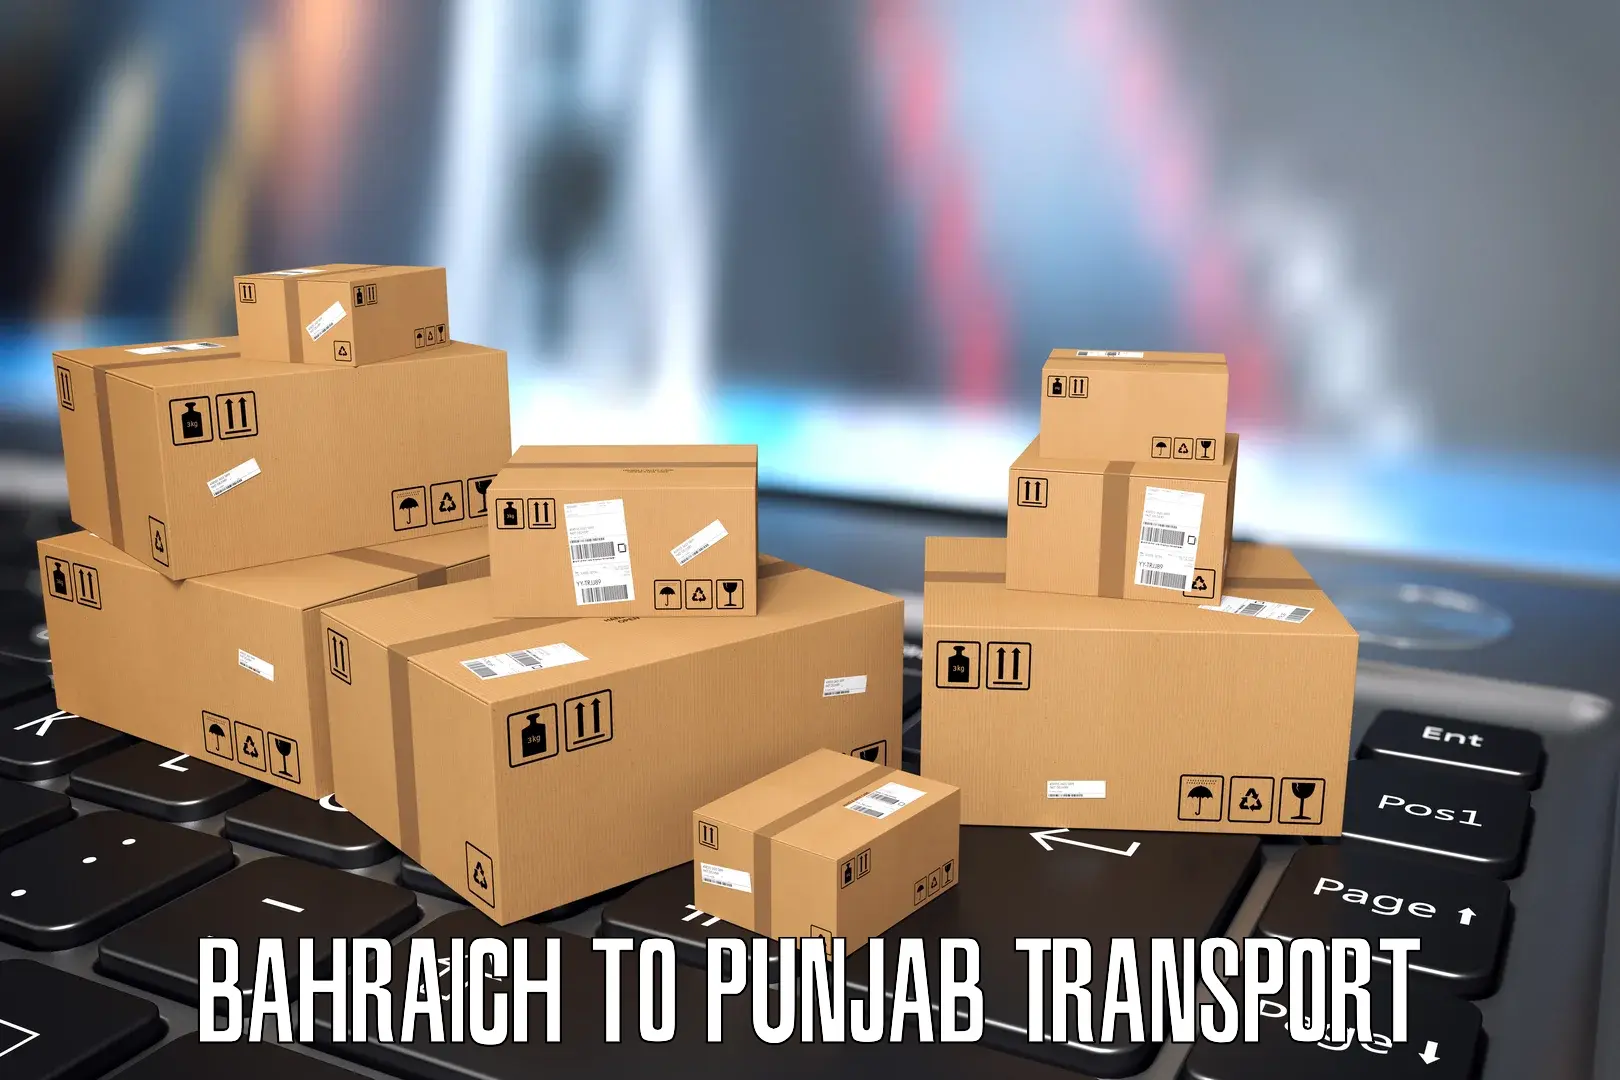 Pick up transport service Bahraich to Mohali